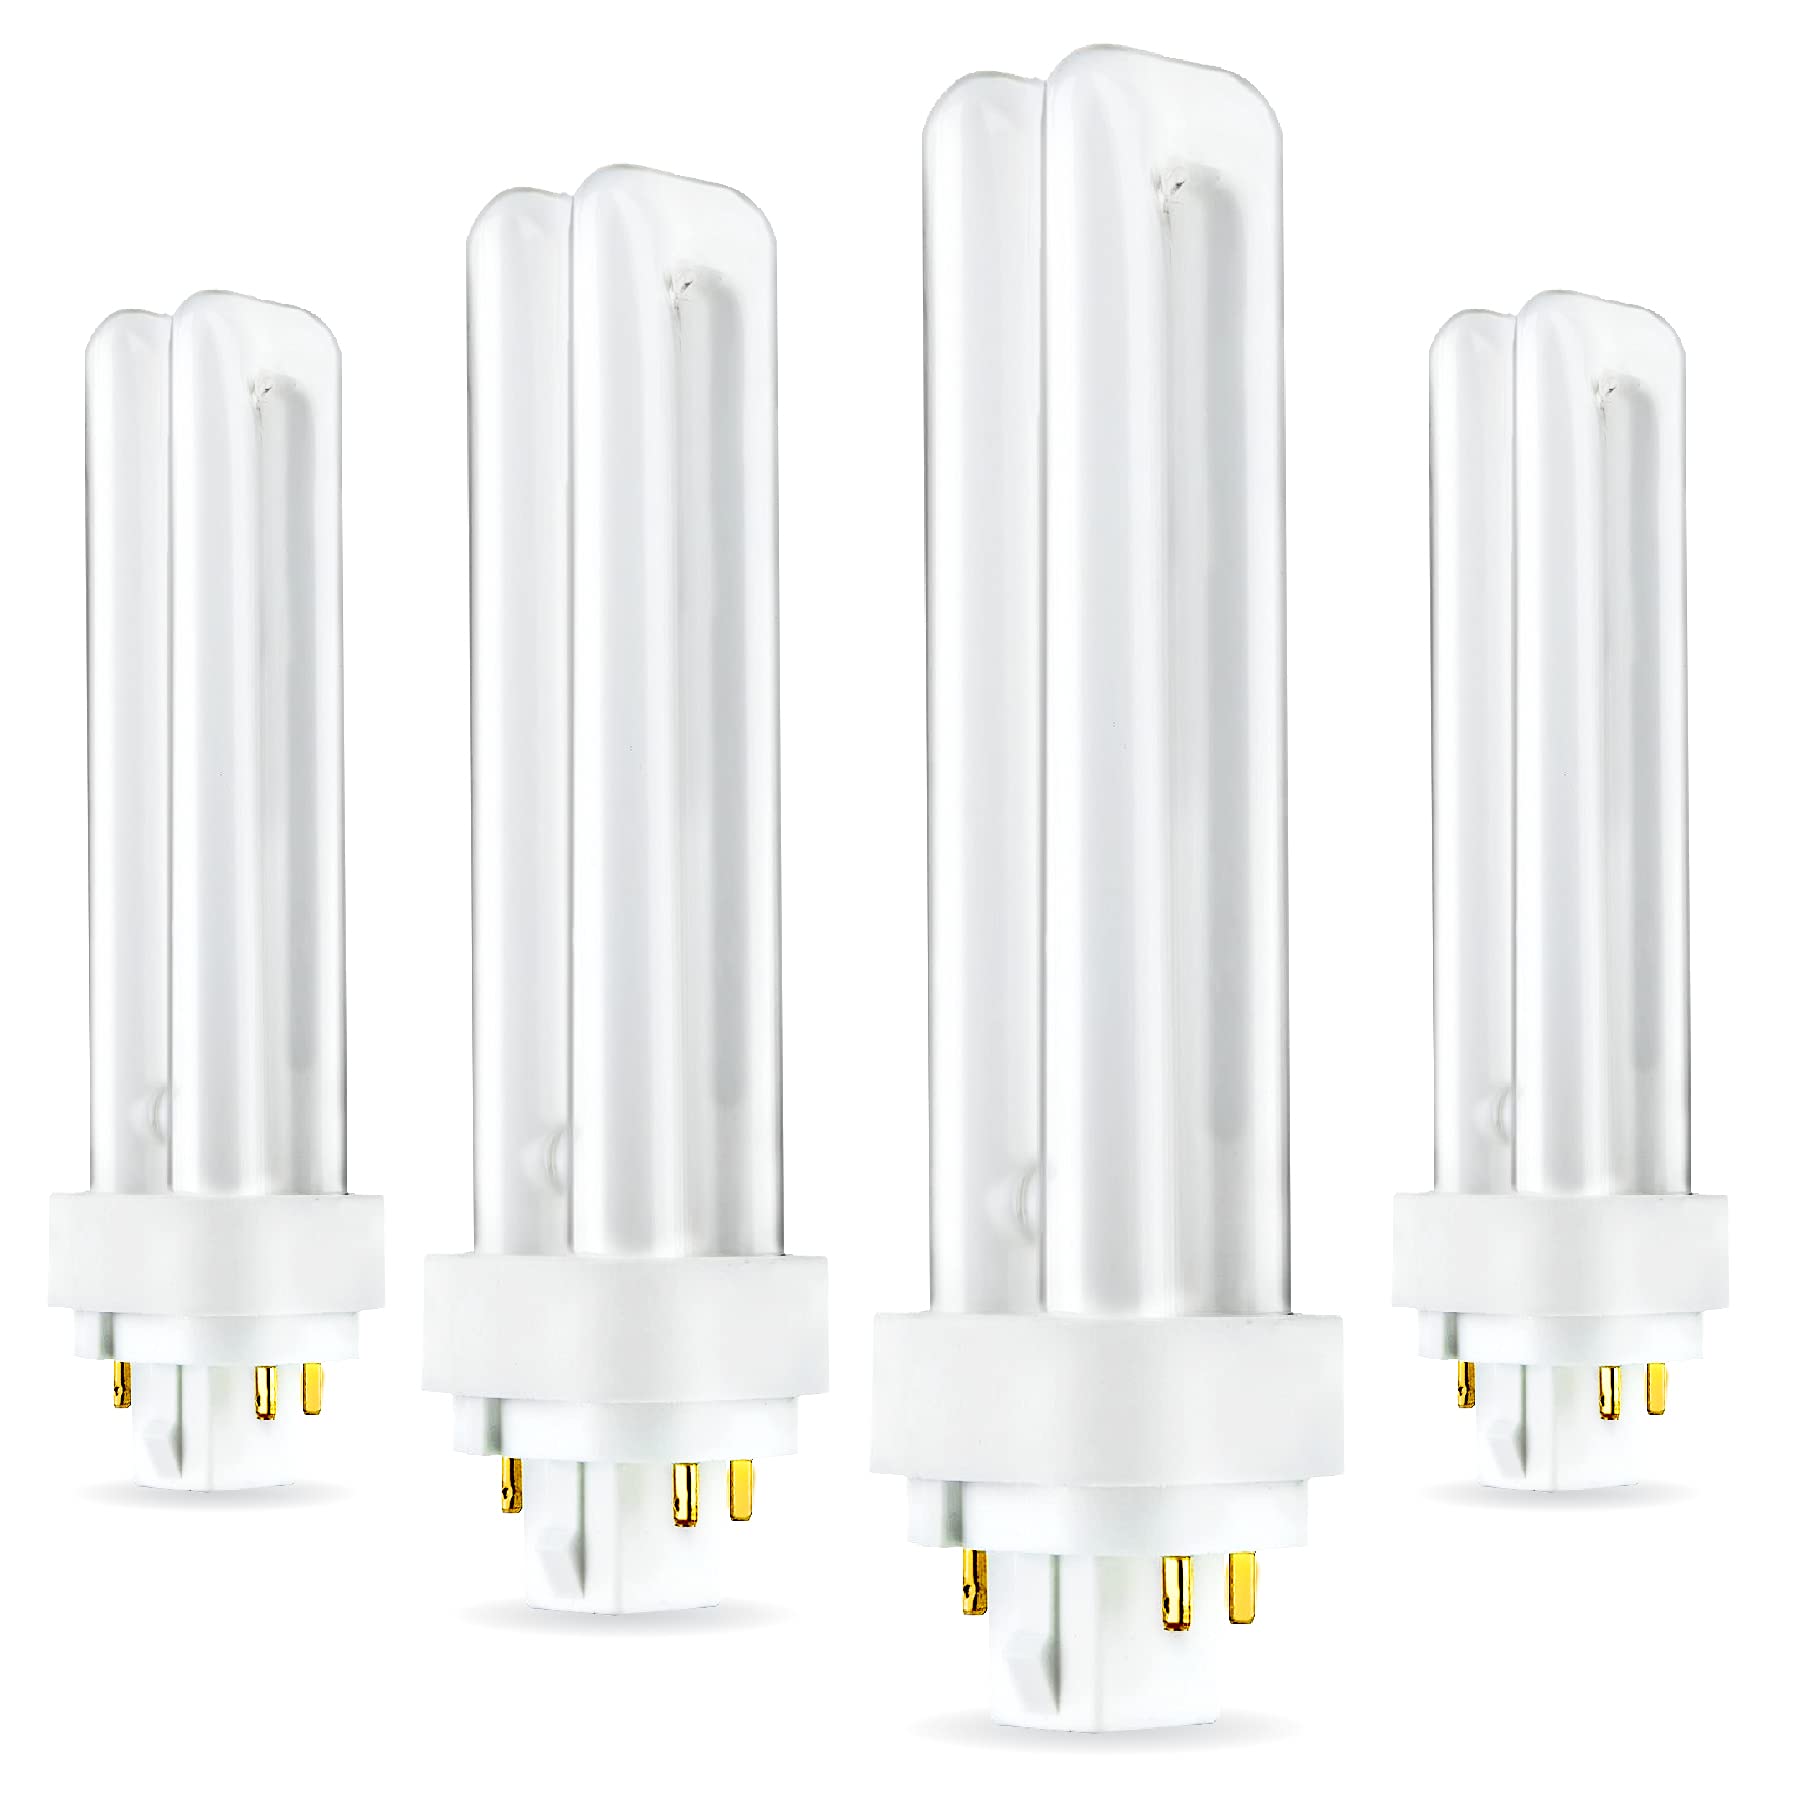 (4 Pack) PLC-13W 841, 4 Pin G24q-1, 13 Watt Double Tube, Compact Fluorescent Light Bulb, Replacement for Philips 38328-1 PL-C 13W/841/4P/ALTO, Sylvania 20667 and GE 97597 - F13DBX/841/ECO4P  - Like New